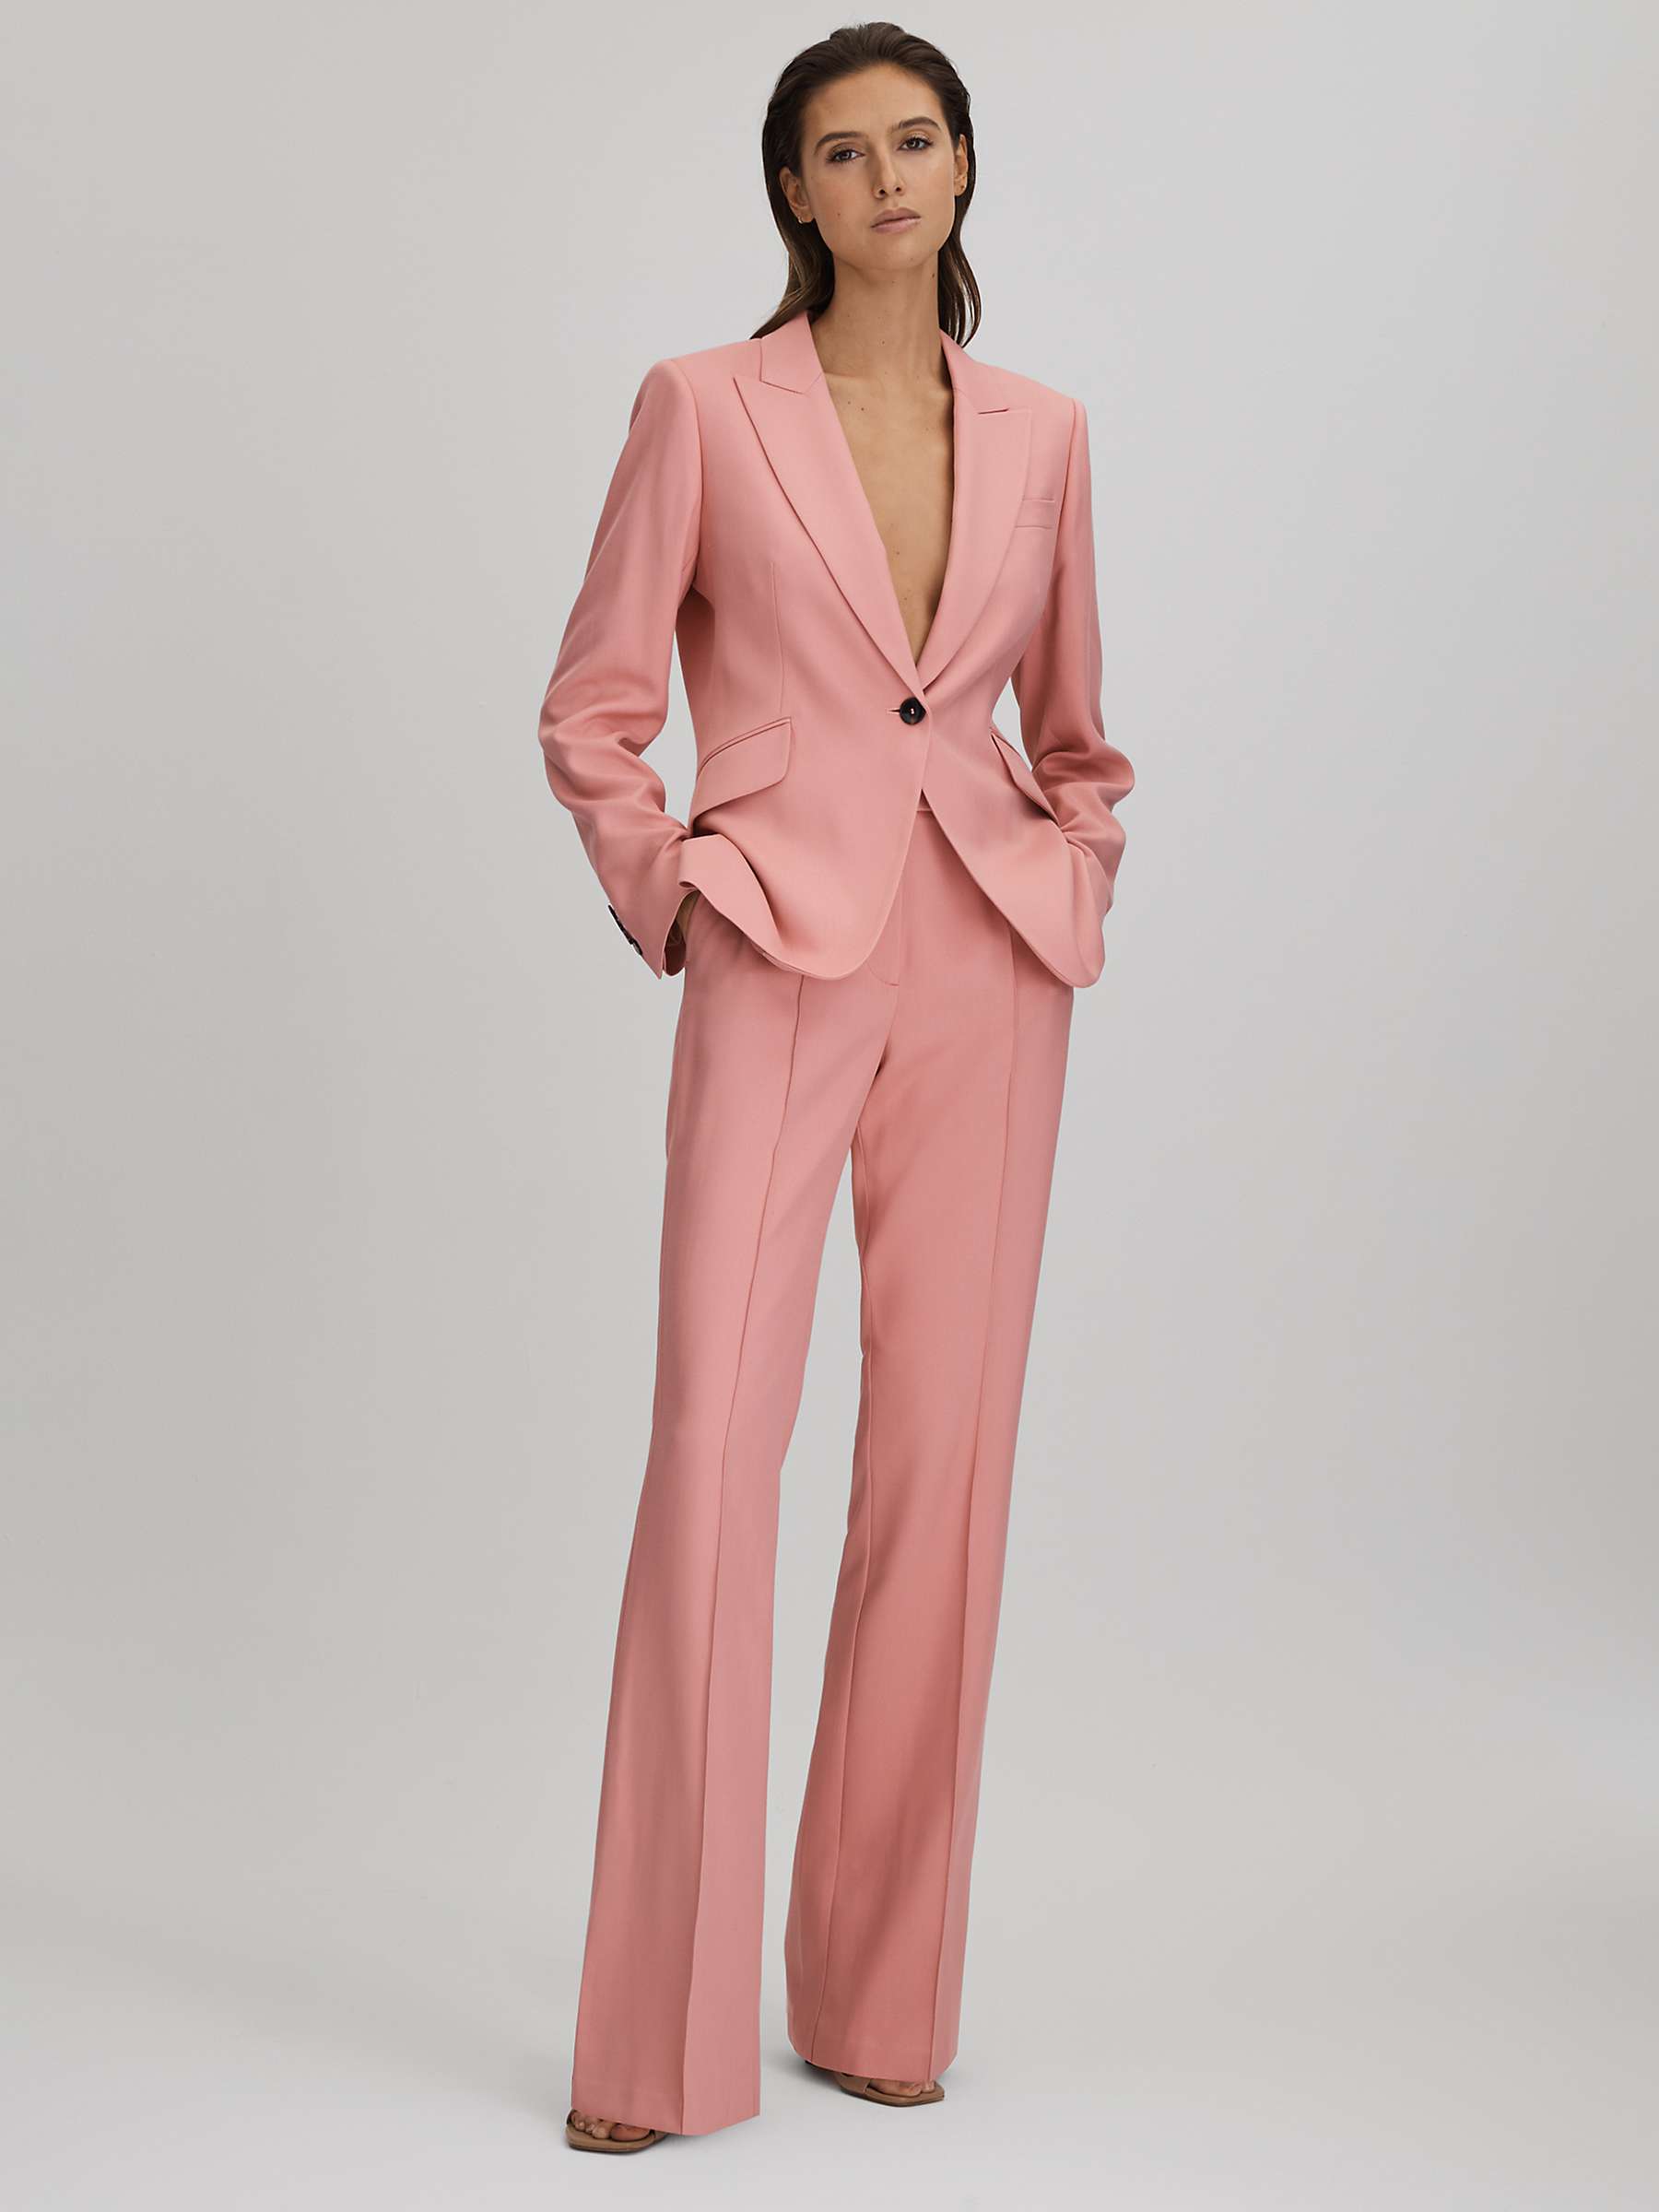 Buy Reiss Millie Tailored Single Breasted Suit Blazer Online at johnlewis.com